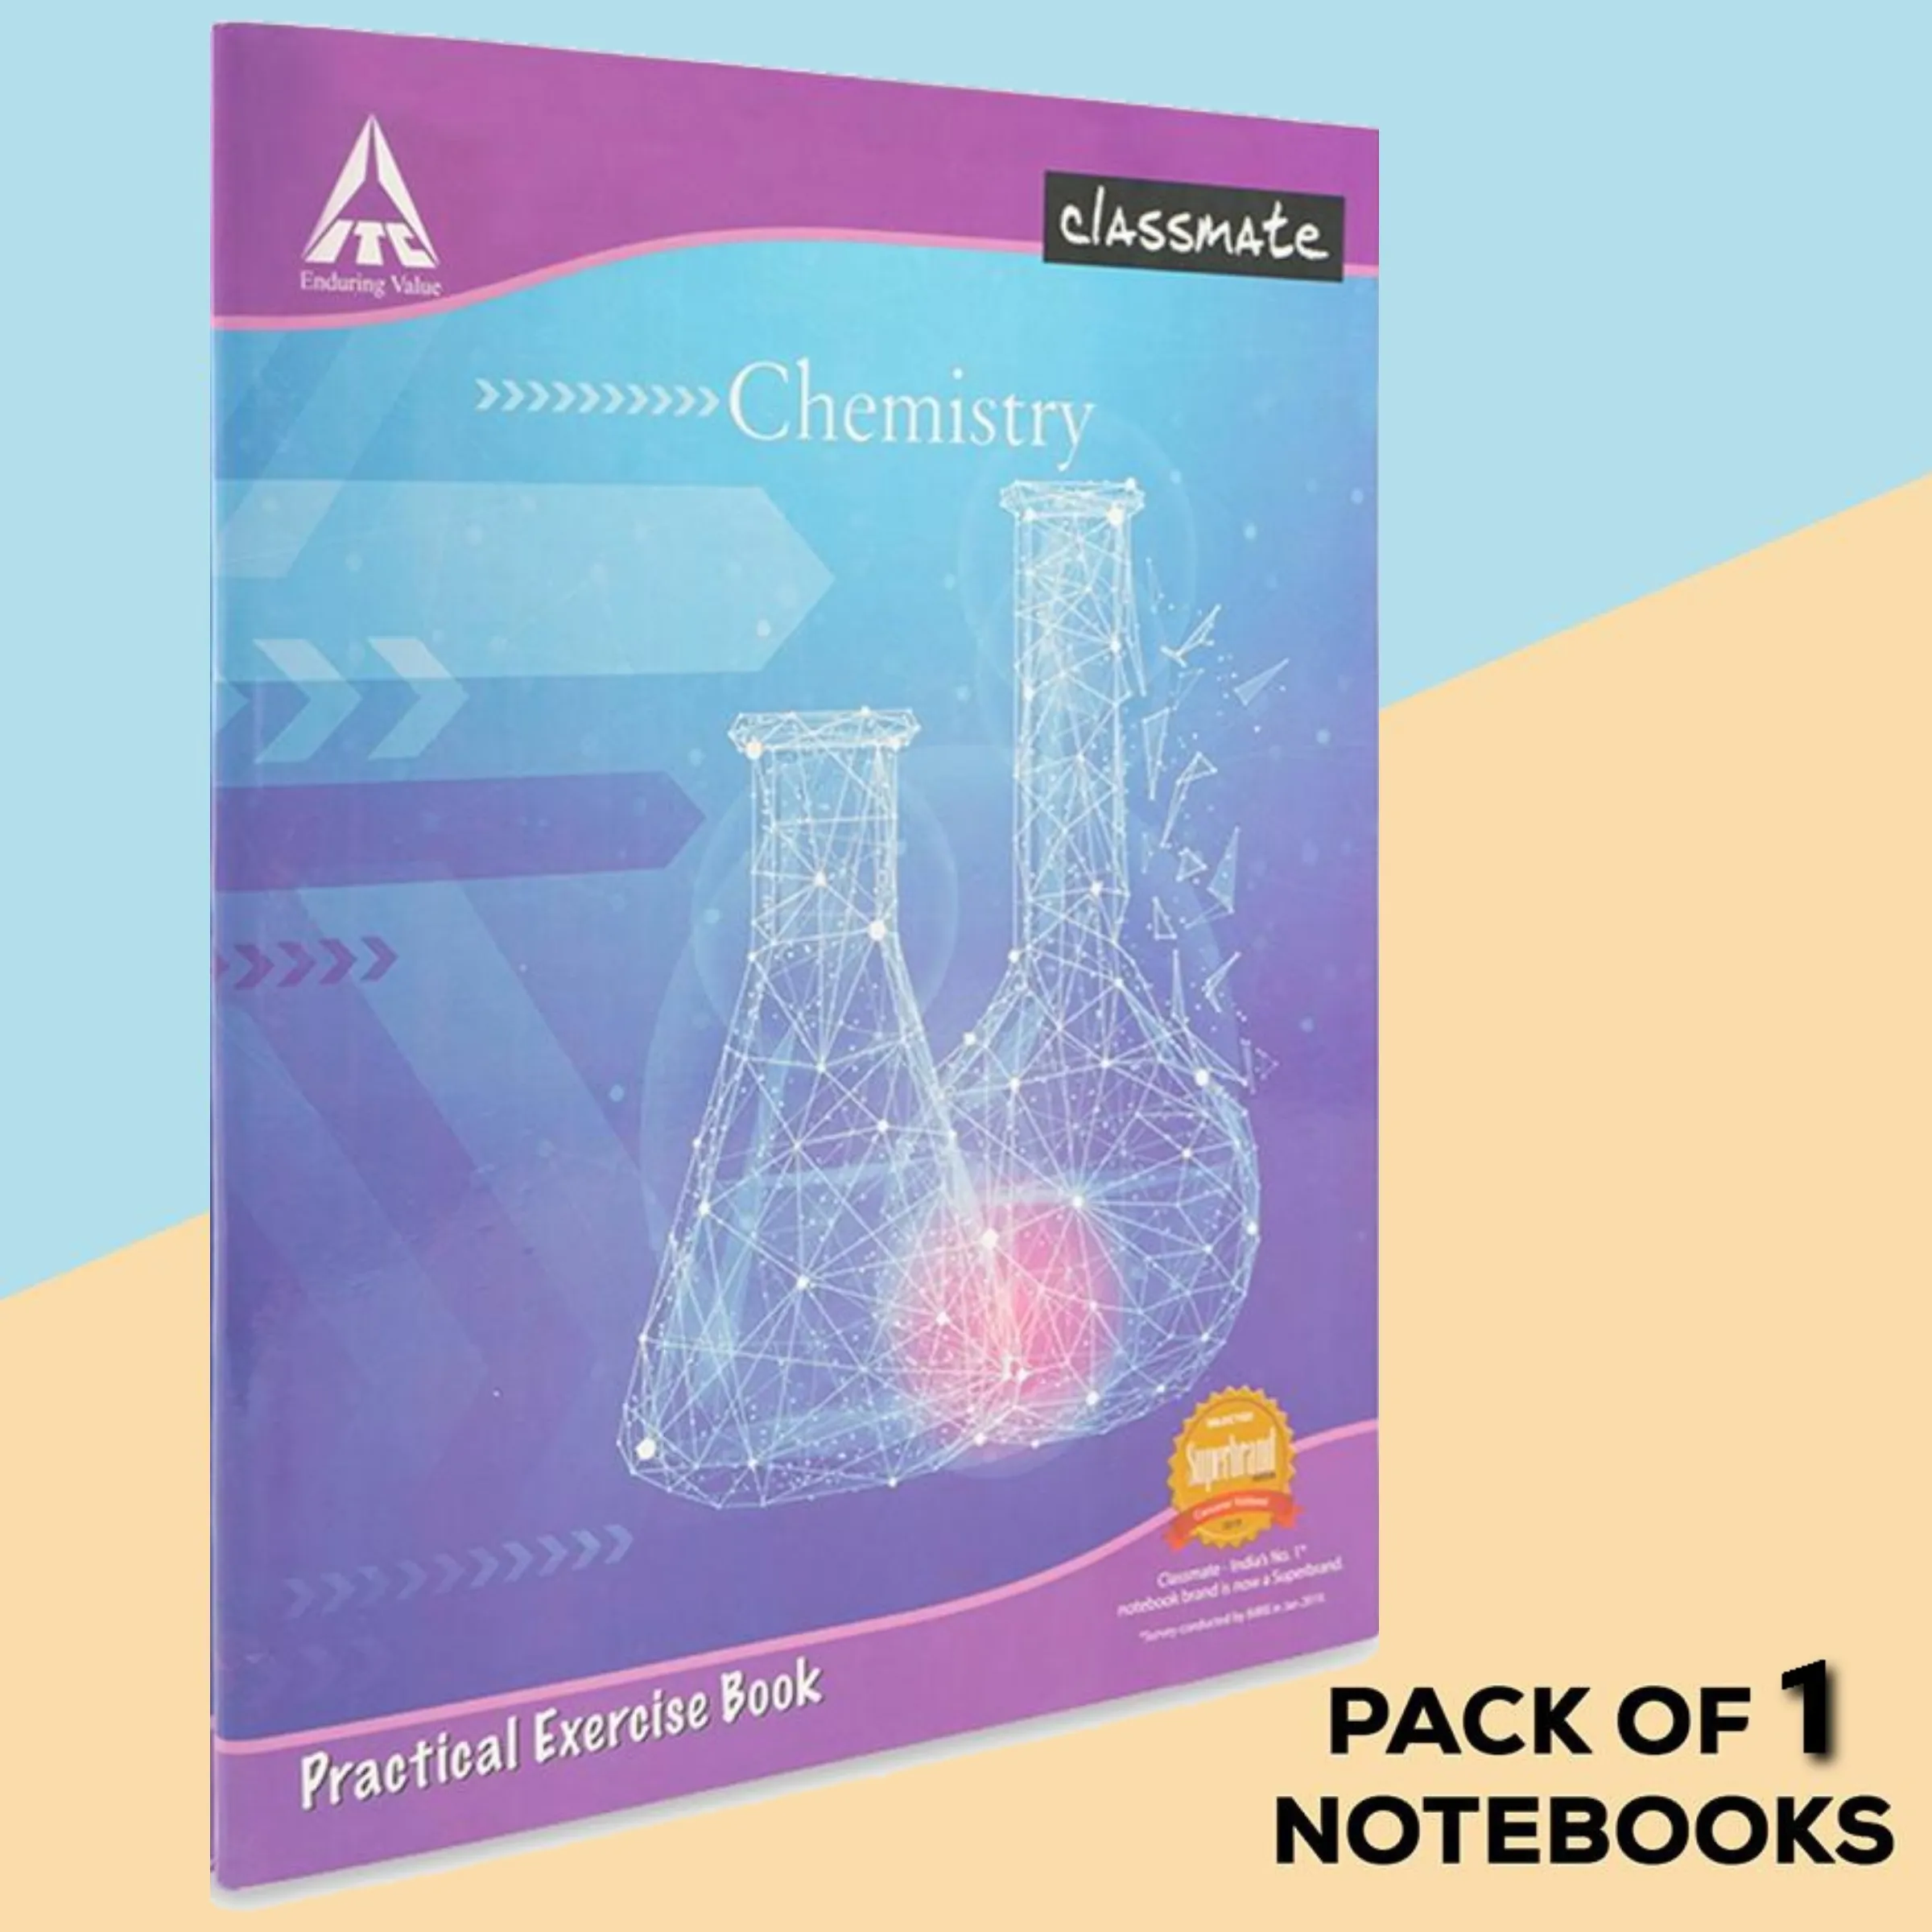 Classmate Chemistry Practical Notebook Hard Cover 108 Pages Single Line/ Blank 26.5X21.5 cm Pack of 1